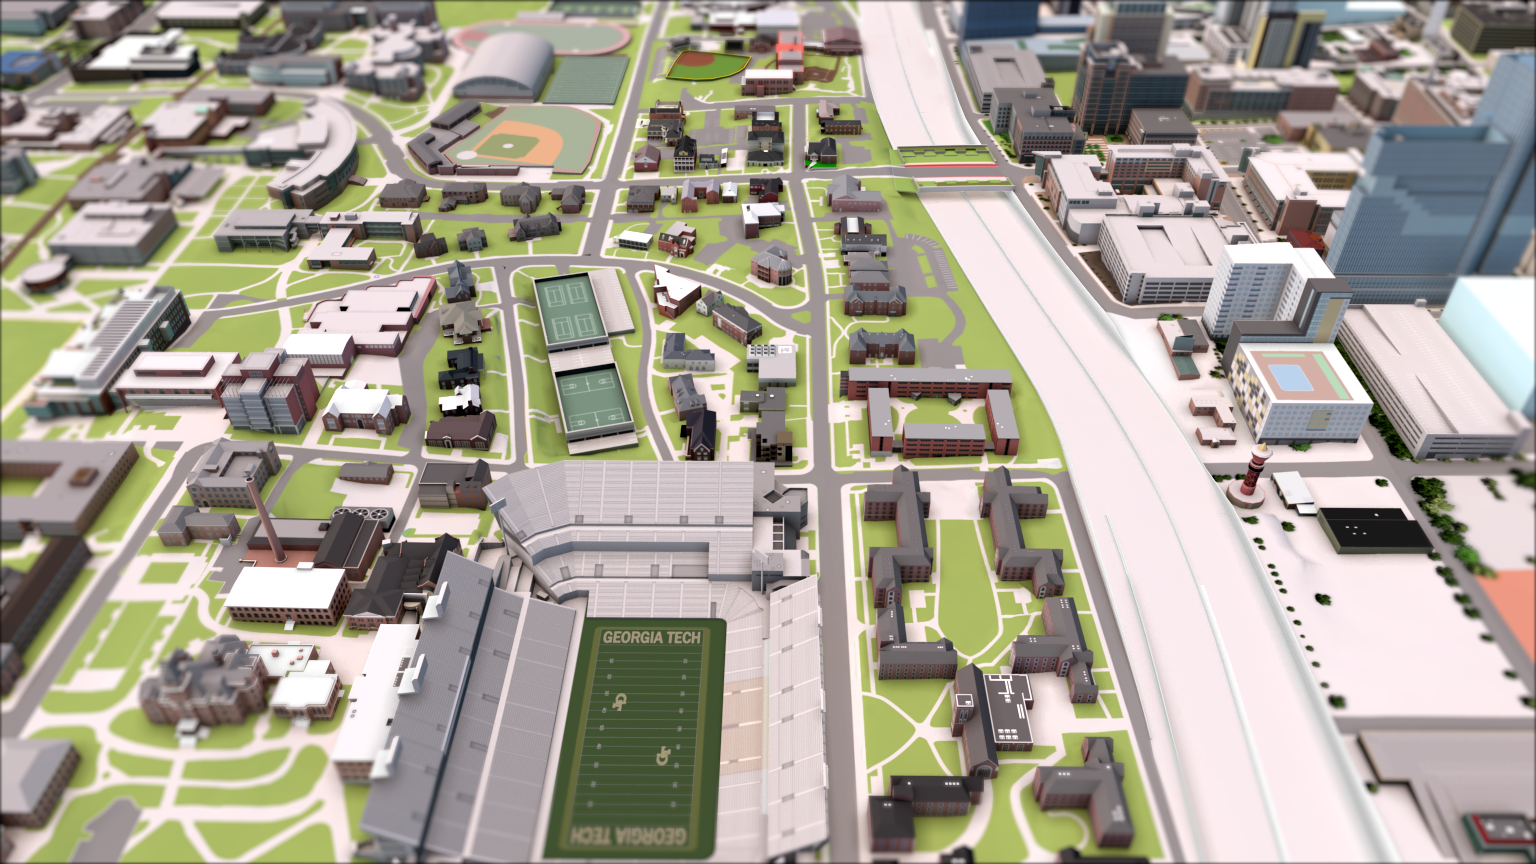 Rendered view of the GT campus with the stadium and highway